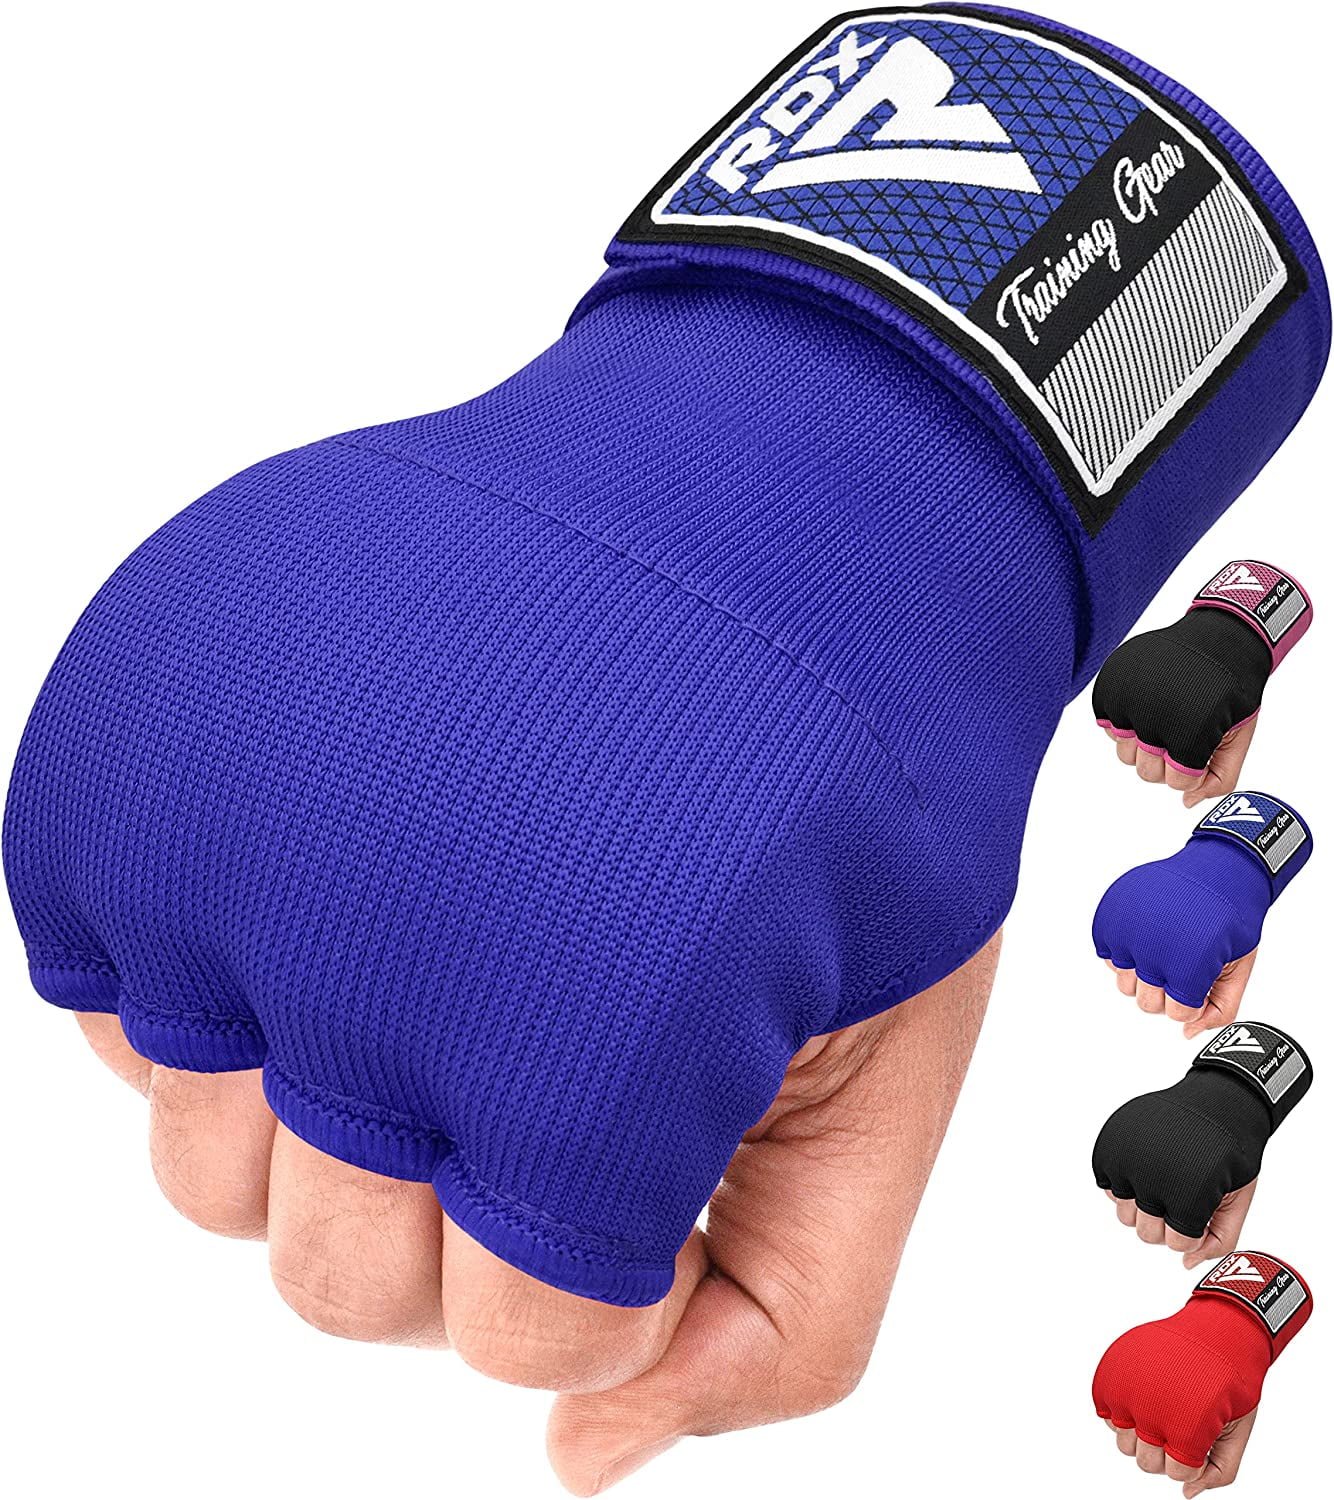 Great for MMA Kickboxing Neoprene Padded Fist Protection Bandages under Mitts with Quick Long Wrist Support Martial Arts Training RDX Boxing Hand Wraps Inner Gloves for Punching Muay Thai 